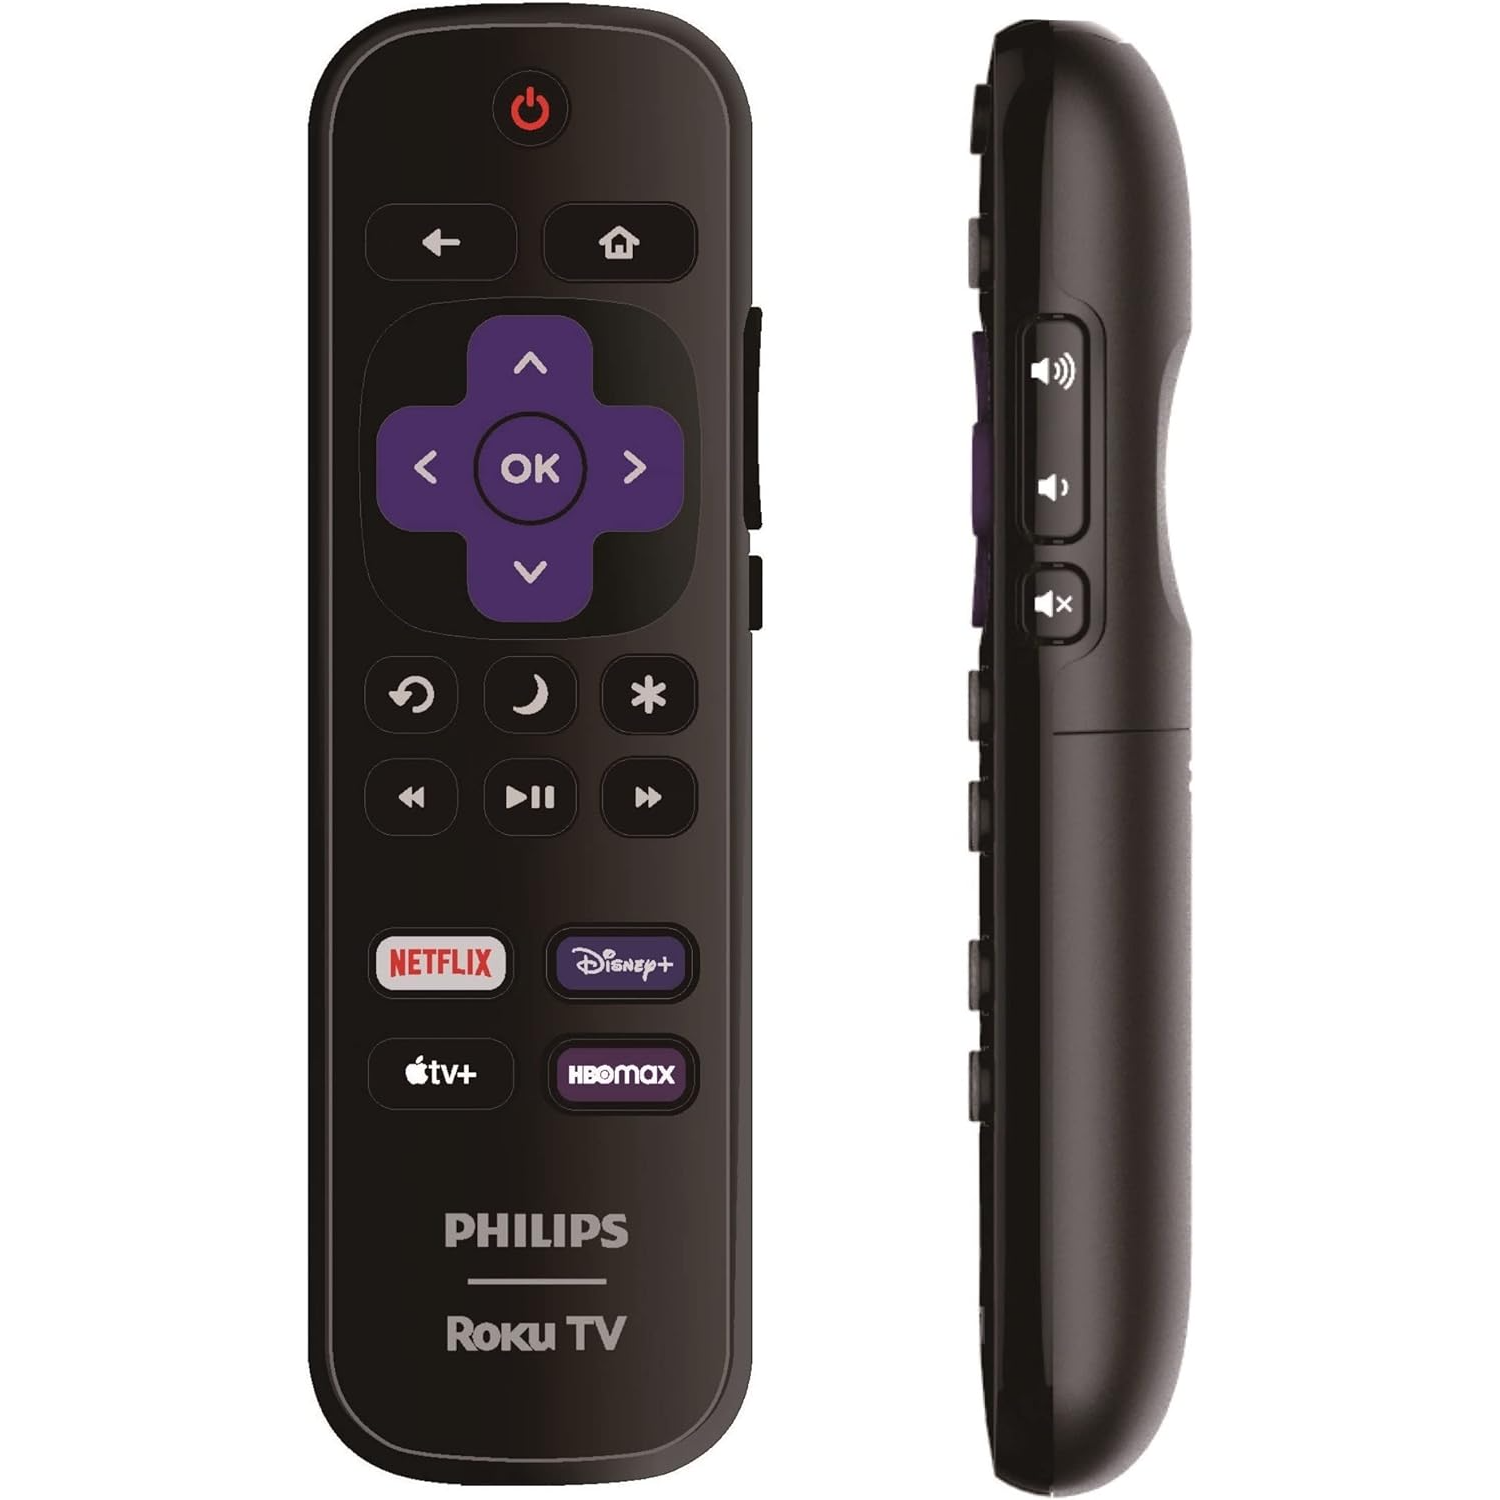 OEM Replacement Remote Control Compatible with All Philips Roku TV Smart TVs【Only Works with Philips Roku TV, Not for Roku Stick and Roku Box】